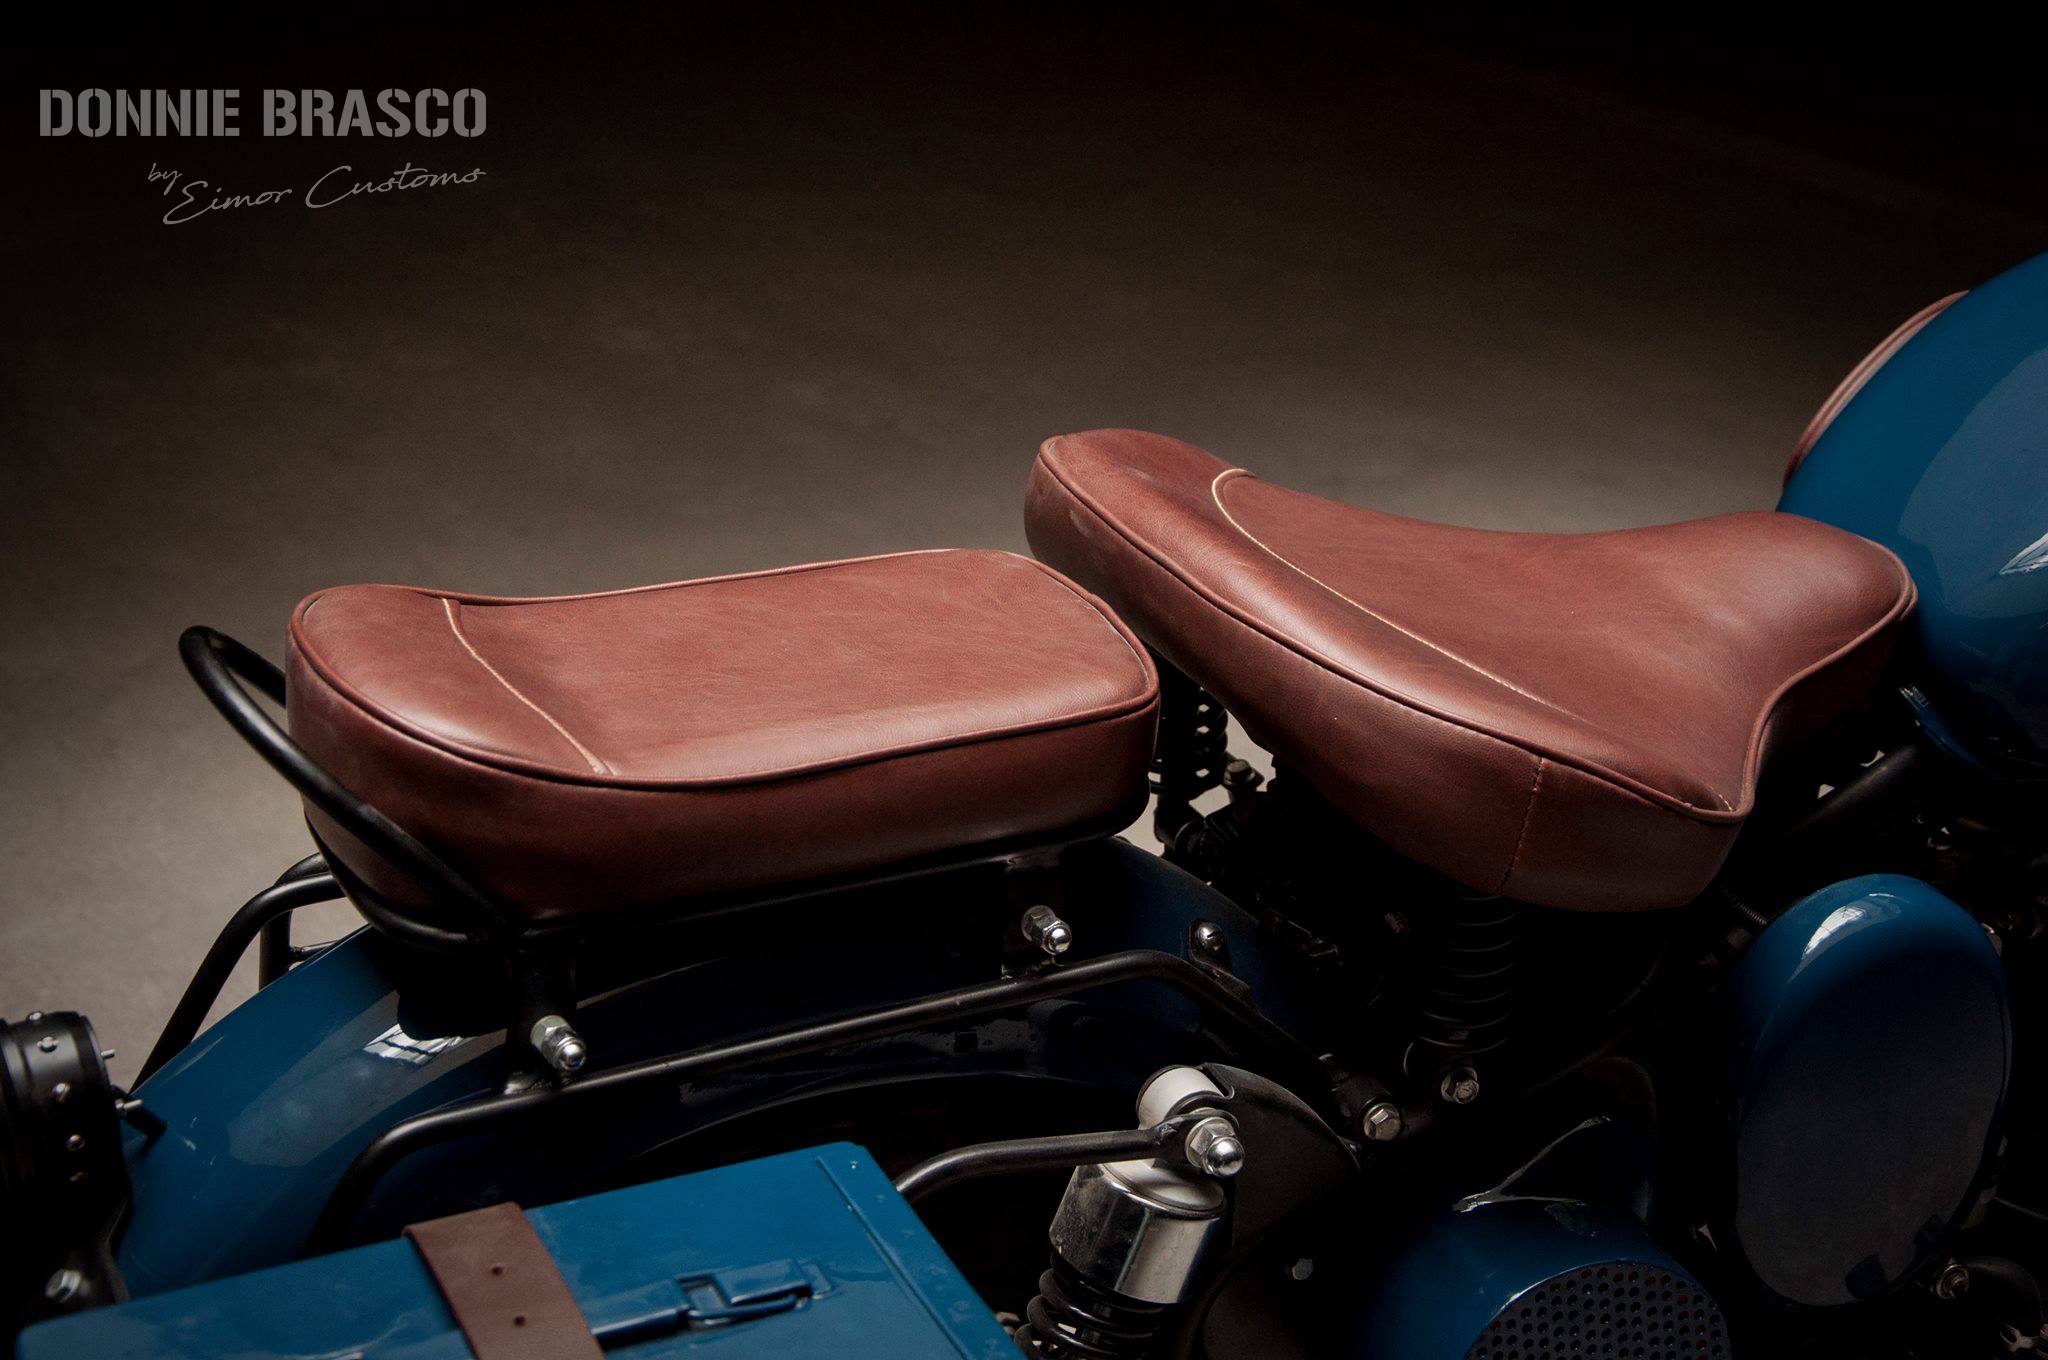 EIMOR Royal Enfield Classic 'Donnie Brasco' Details and Photos - top